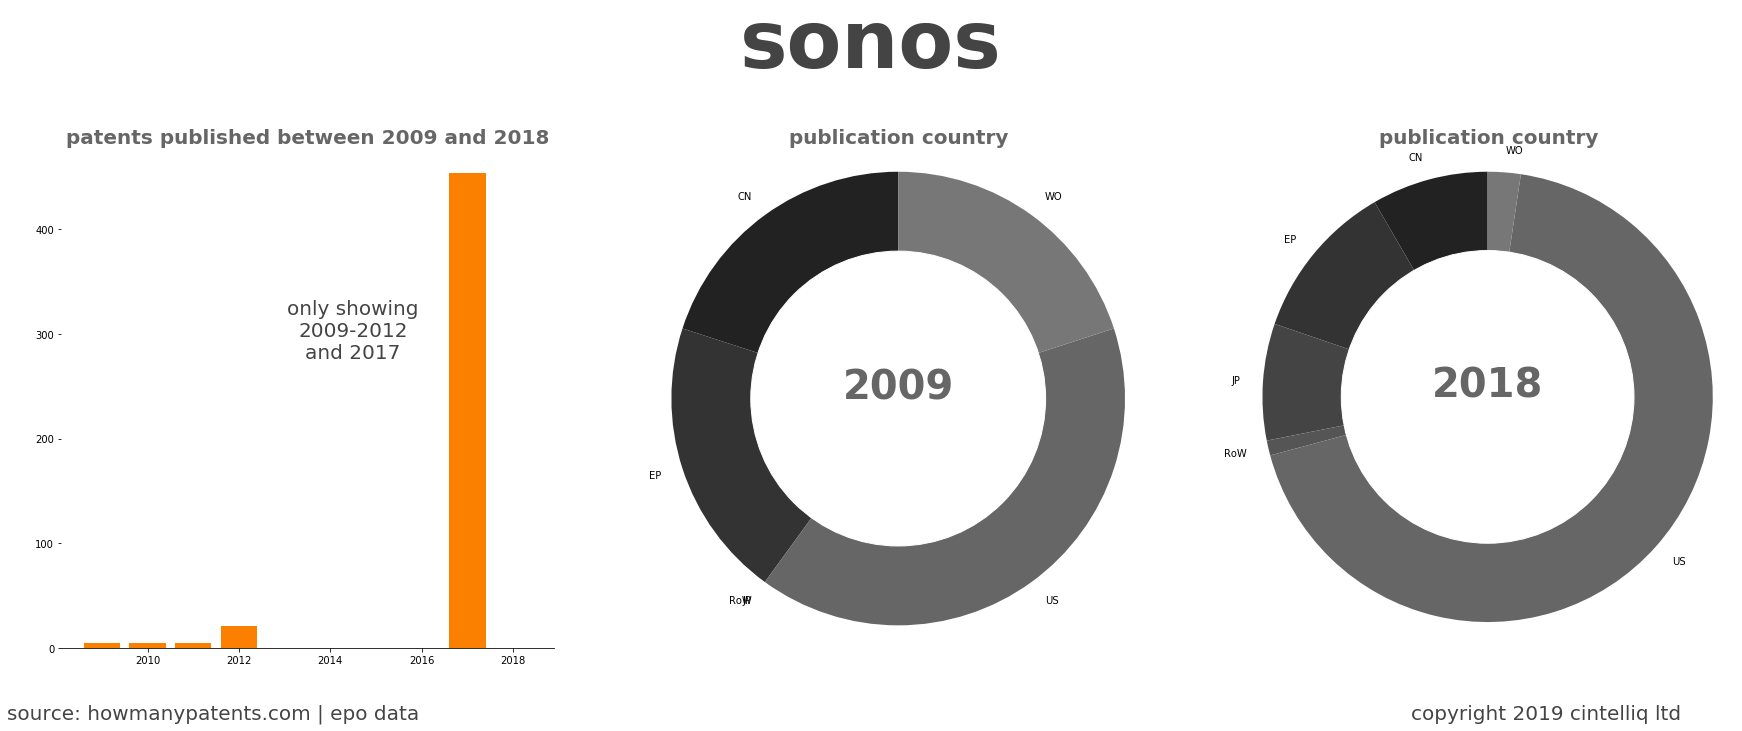 summary of patents for Sonos